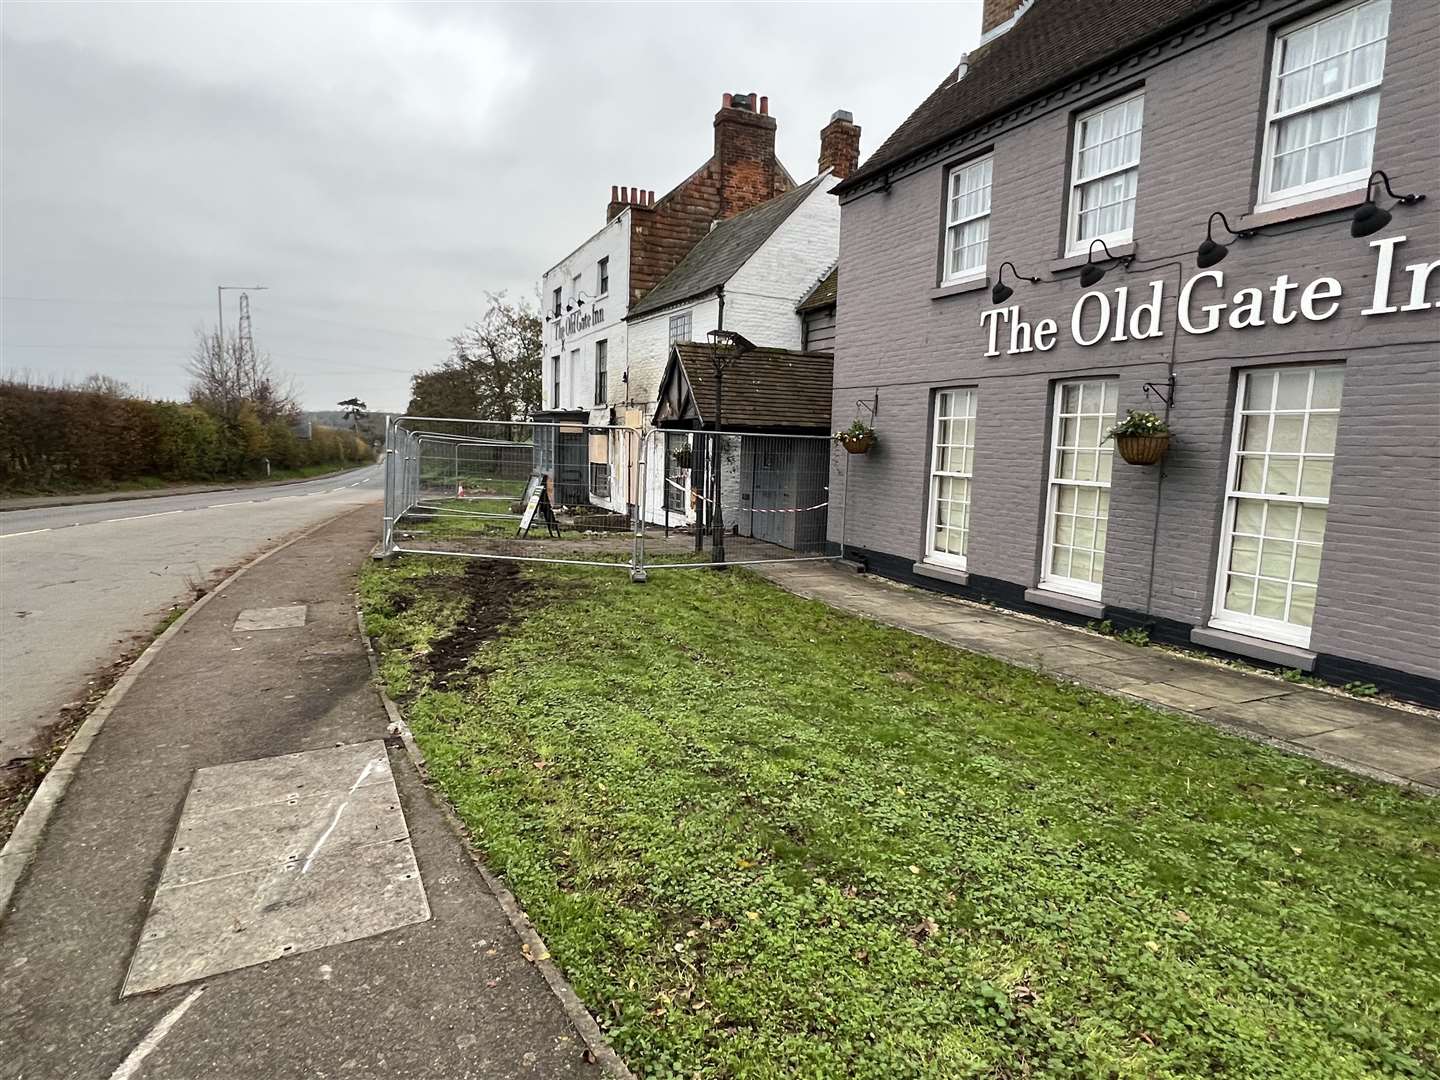 The scene of the crash at The Old Gate Inn Picture: Barry Goodwin.